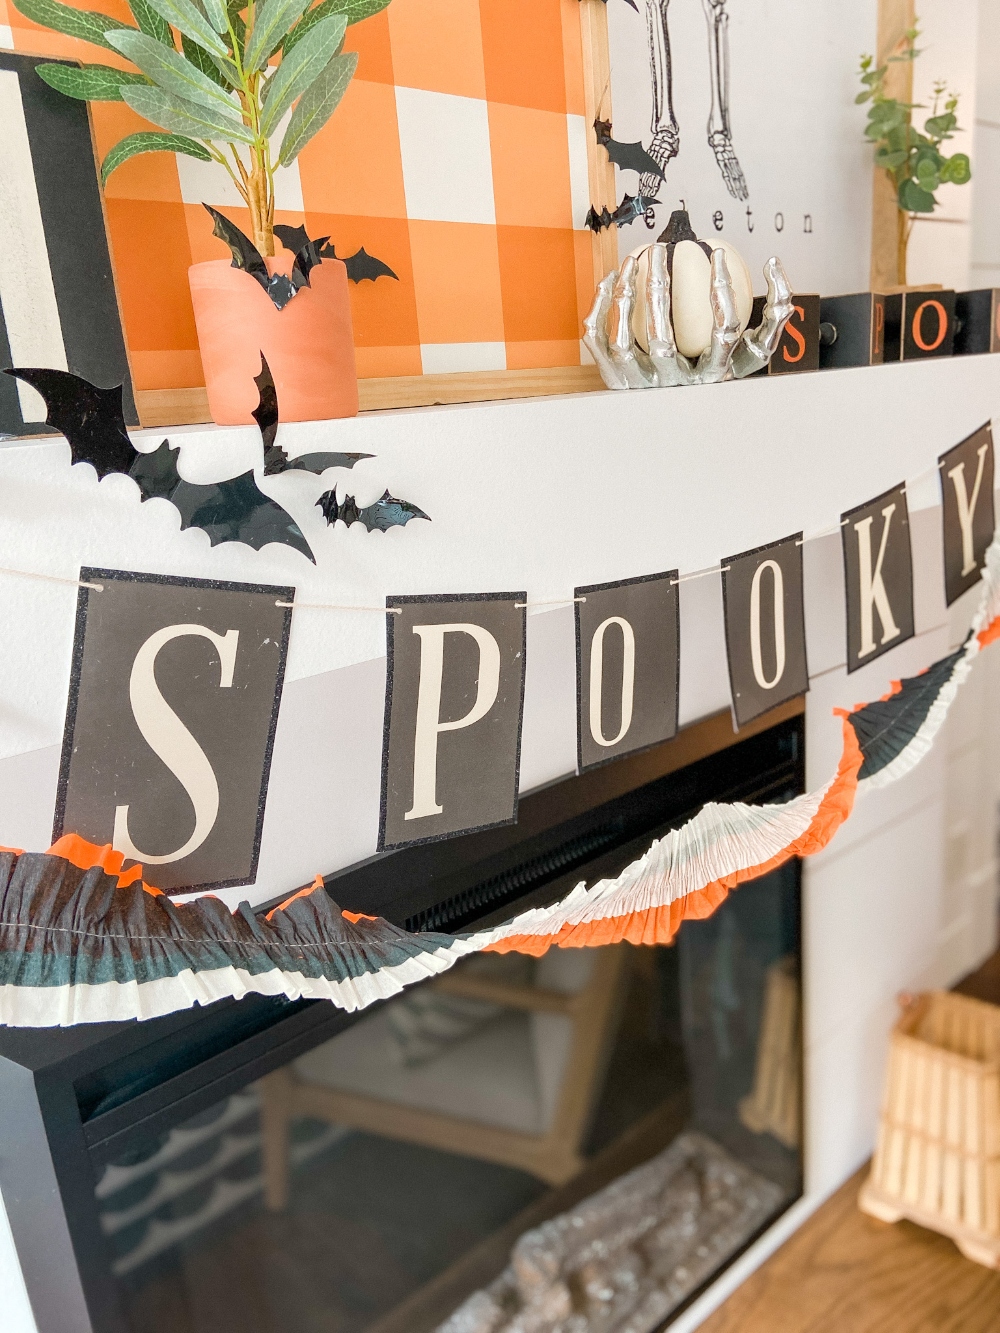 Spooky Halloween Decor and Mantel. Add some spooky charm to your home with these easy Halloween ideas!